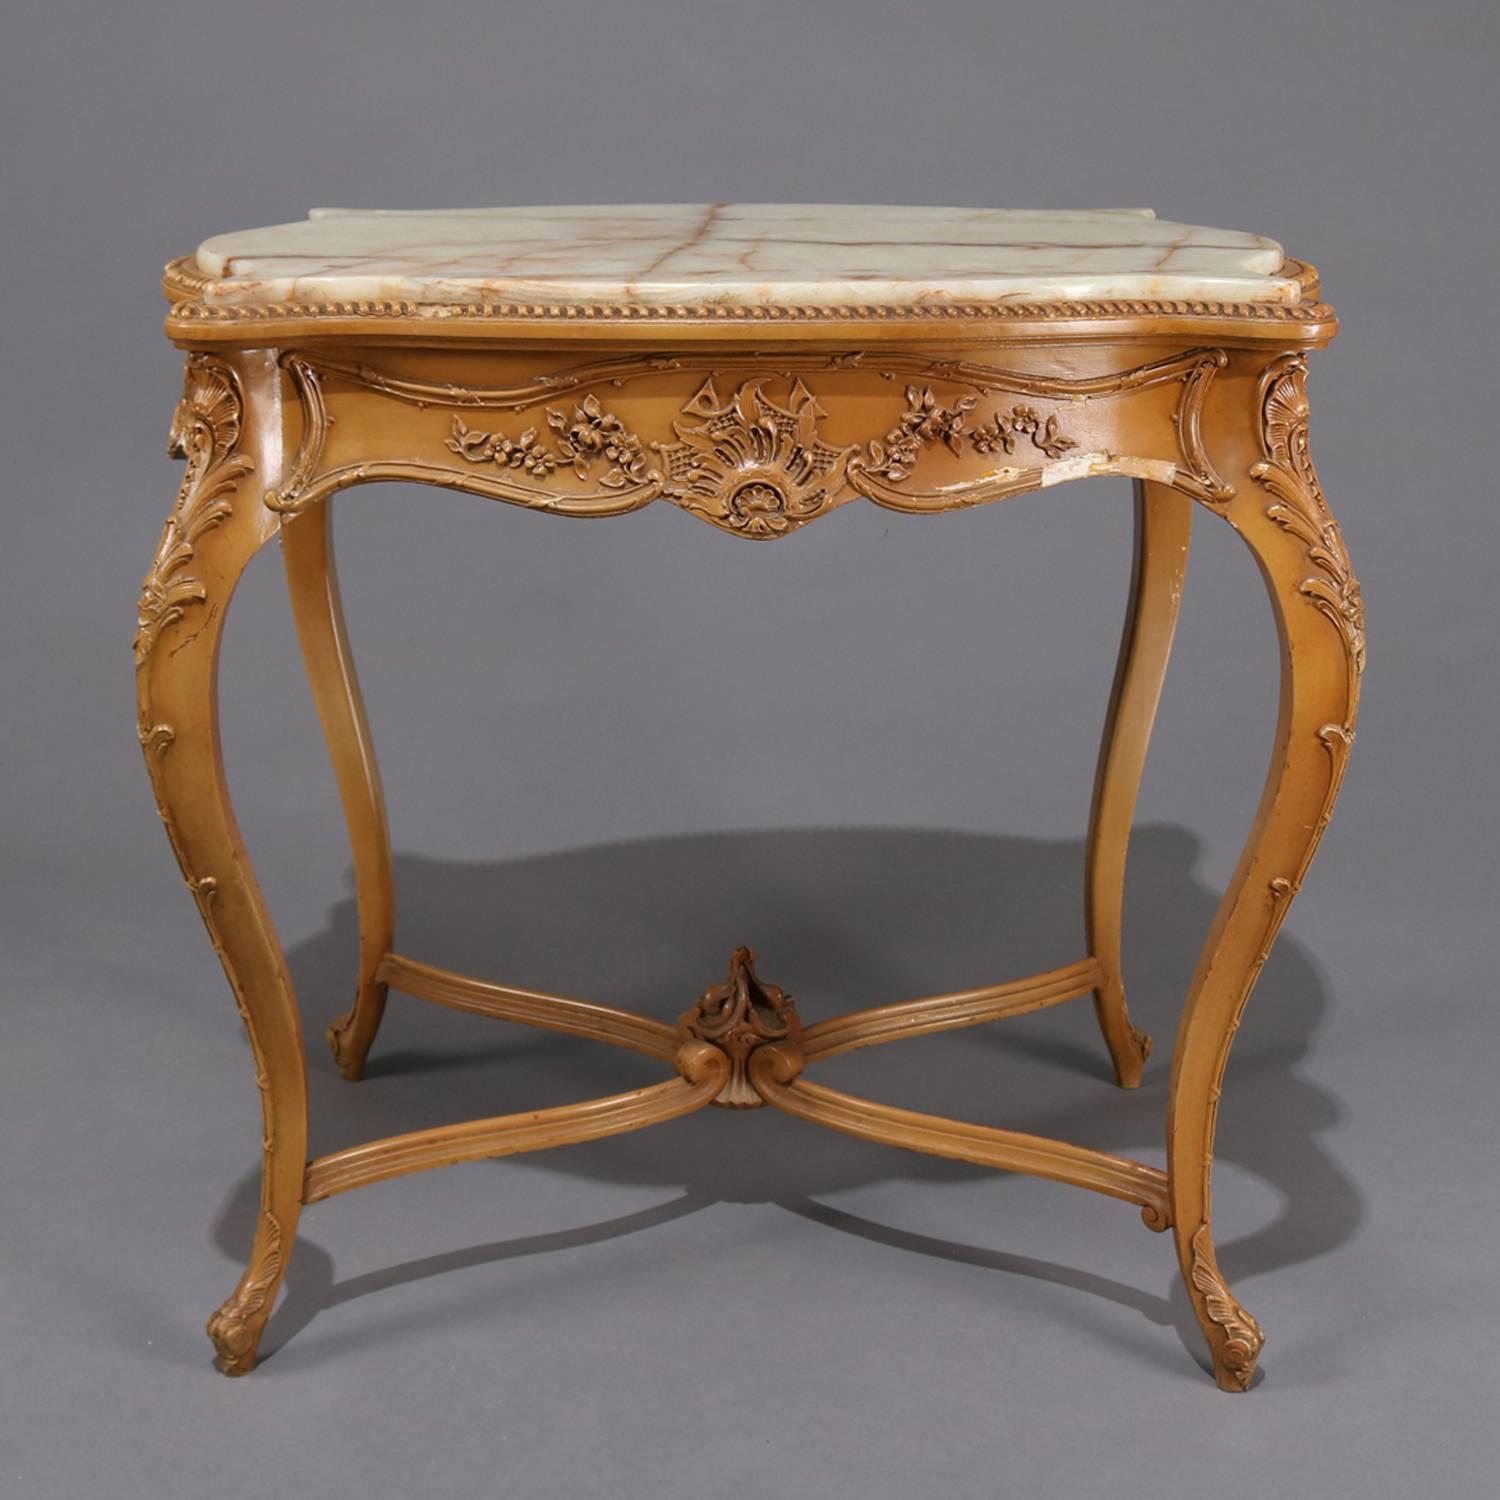 19th Century Antique French Louis XIV Painted Carved Giltwood Onyx Top Center Table